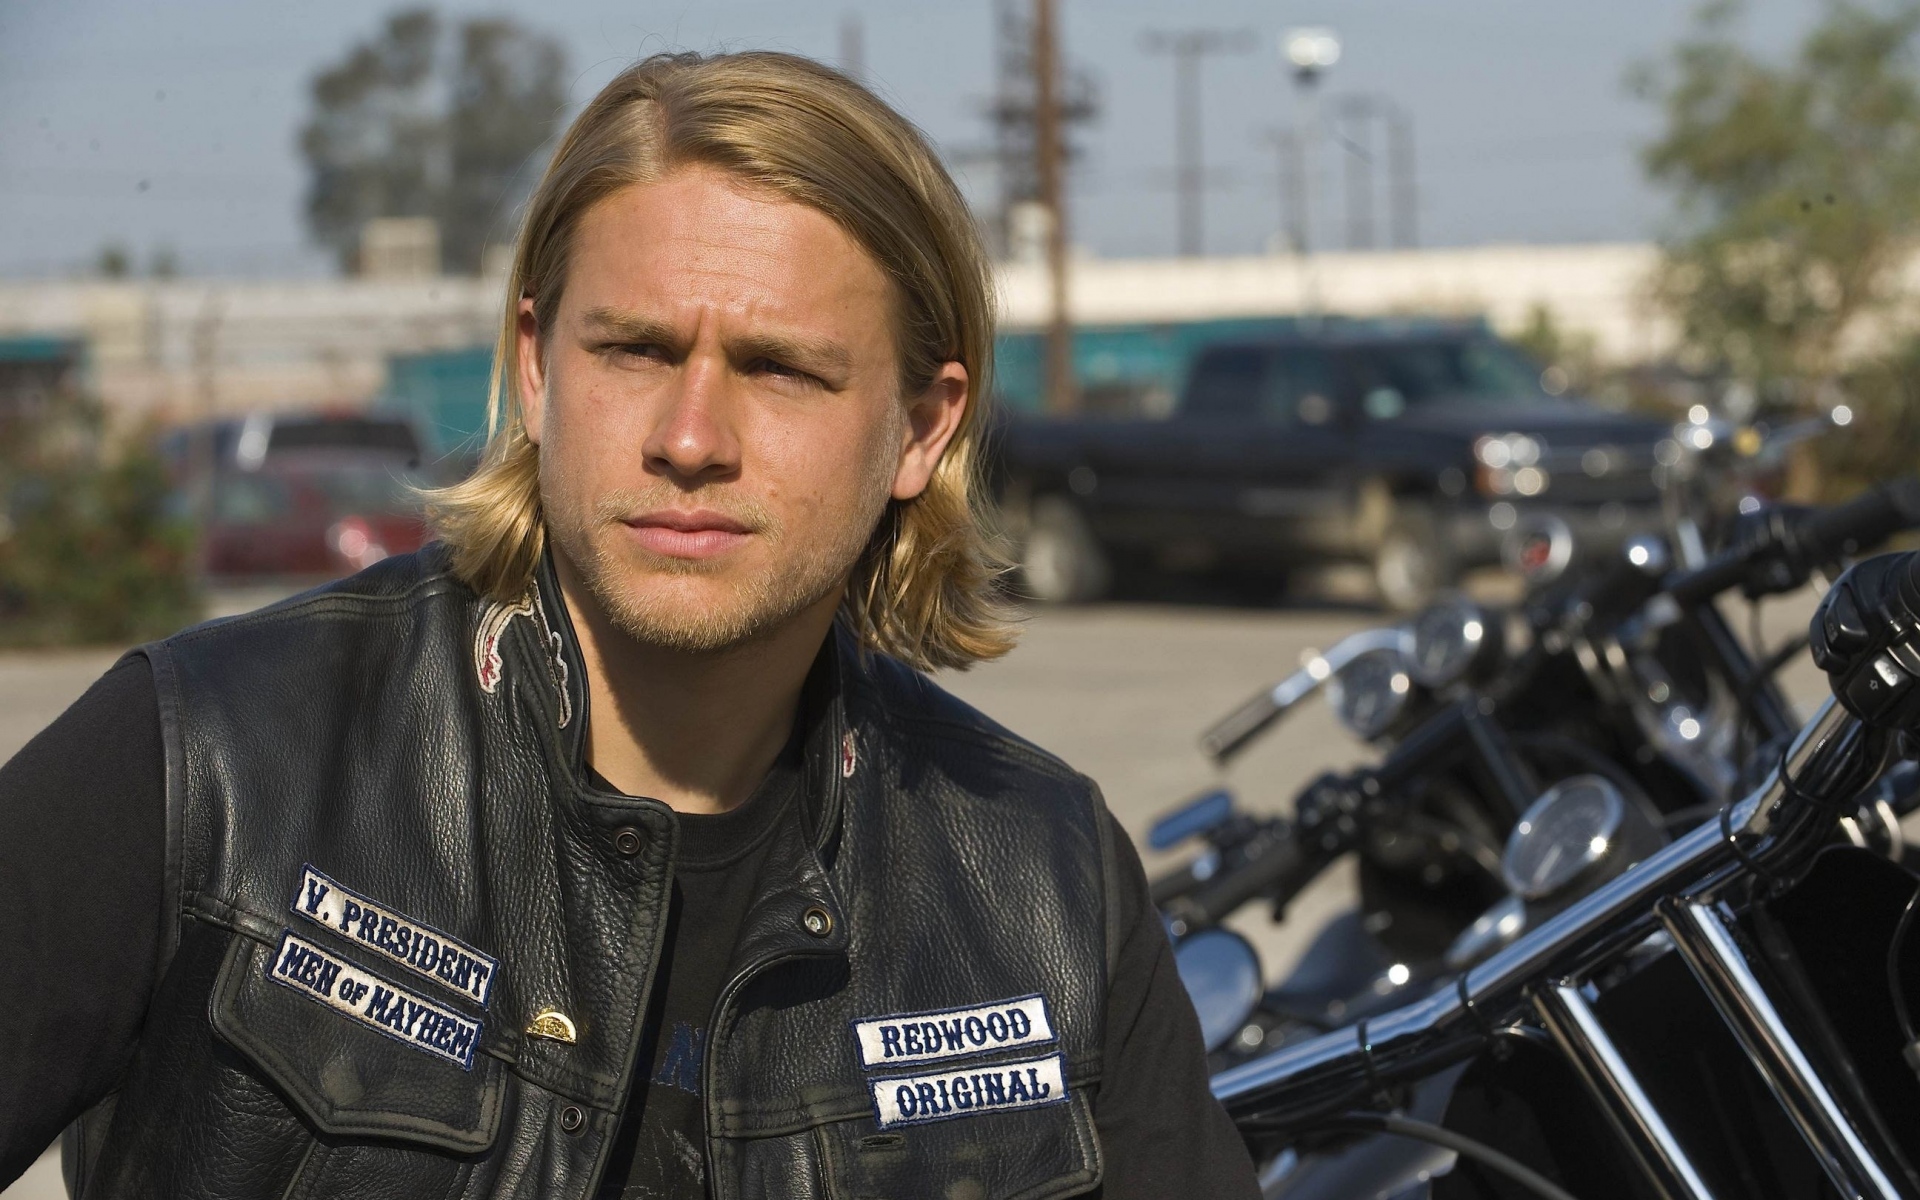 sons of anarchy, tv show, actor, charlie hunnam, motorcycle